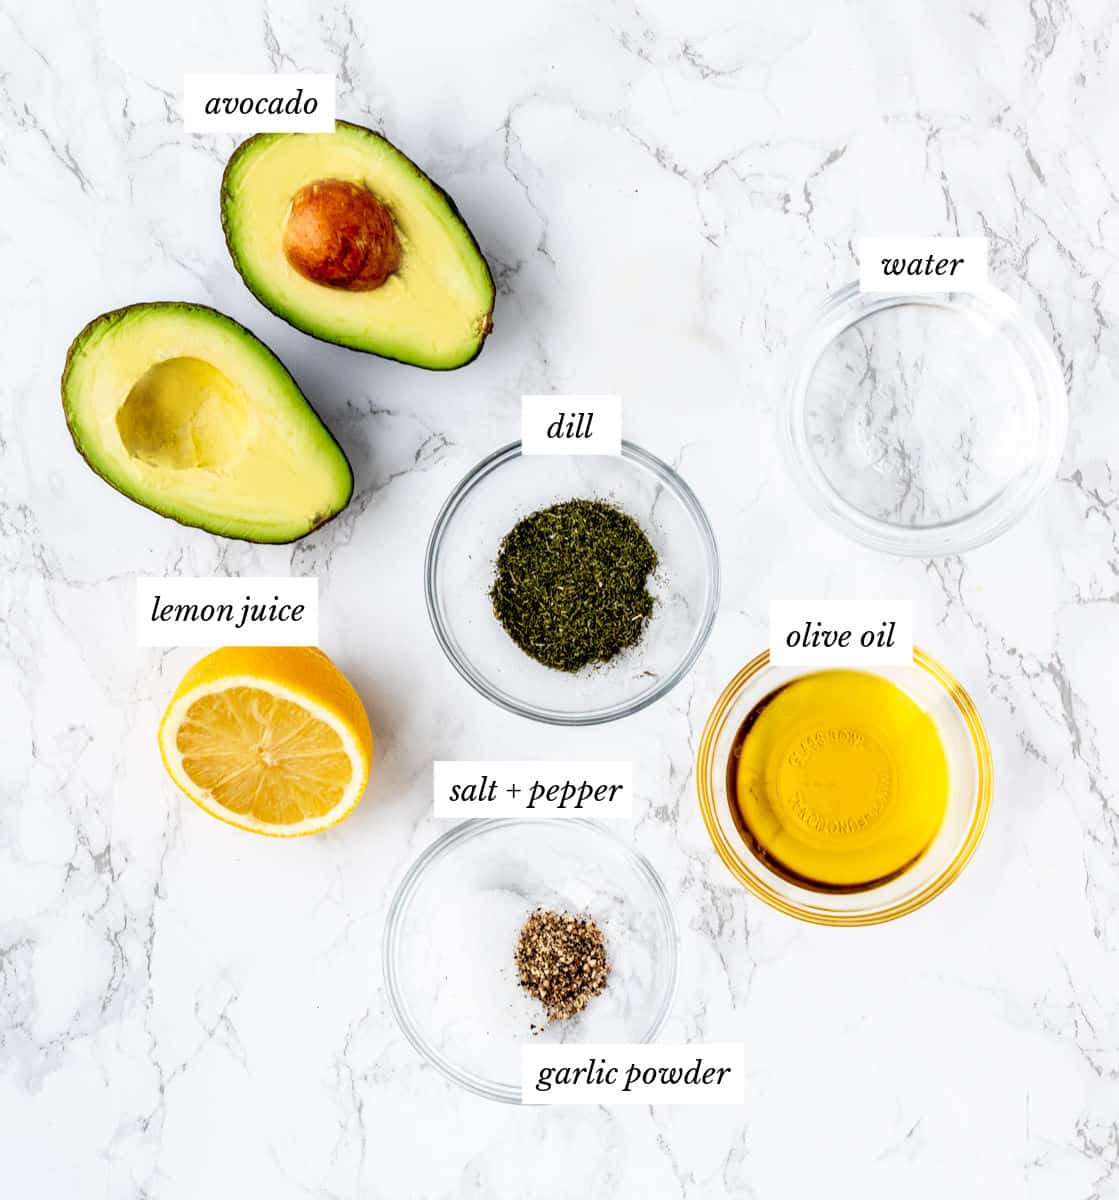 Ingredients to make the avocado crema with labels.